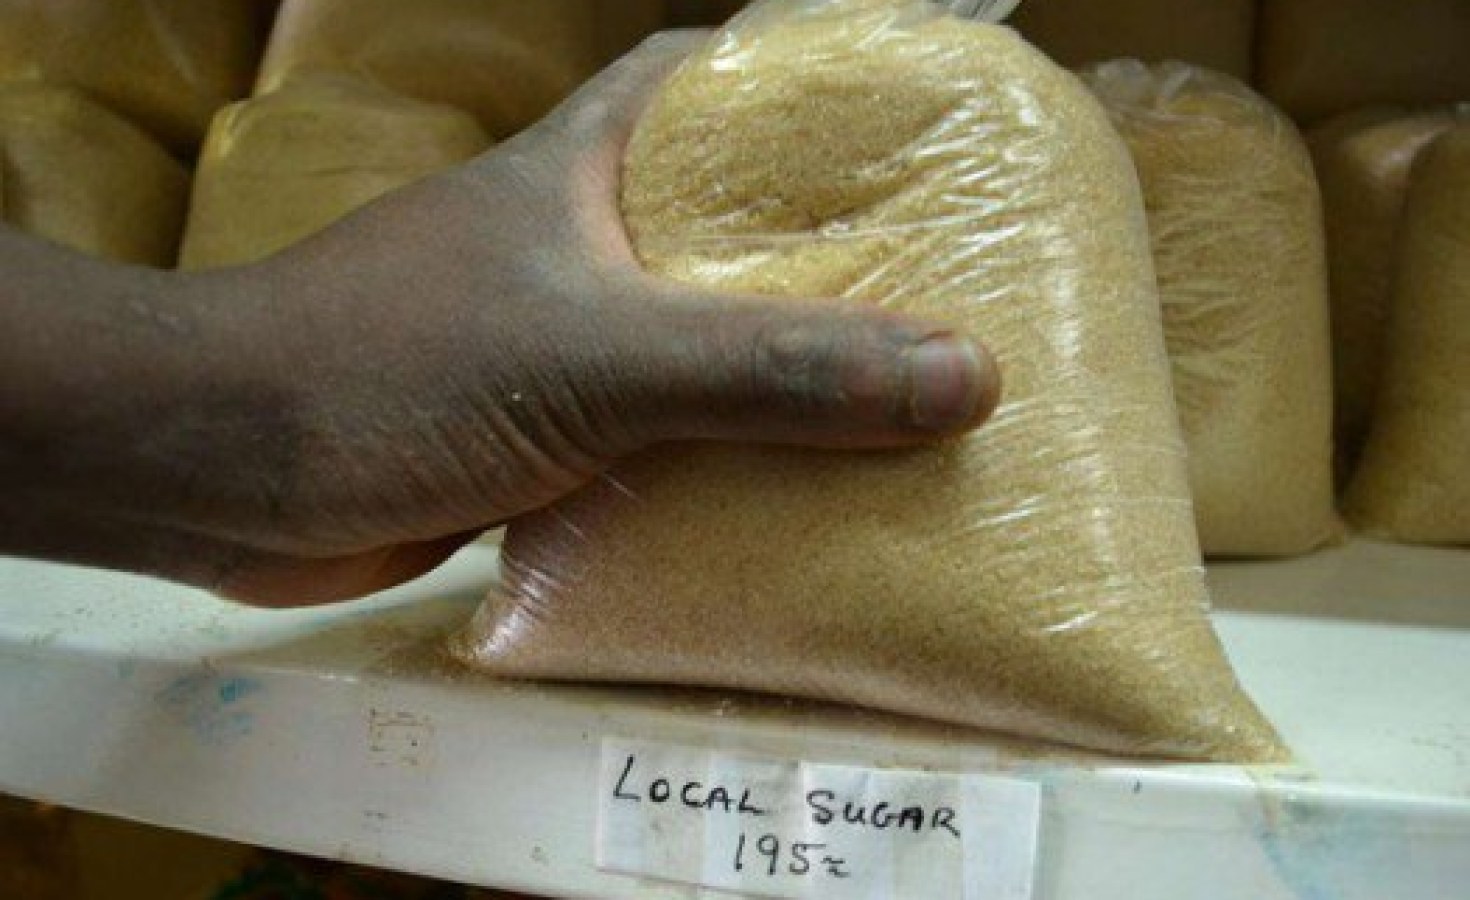 REVEALED: Blunder That Led to Release of Poisonous Sugar in the Market